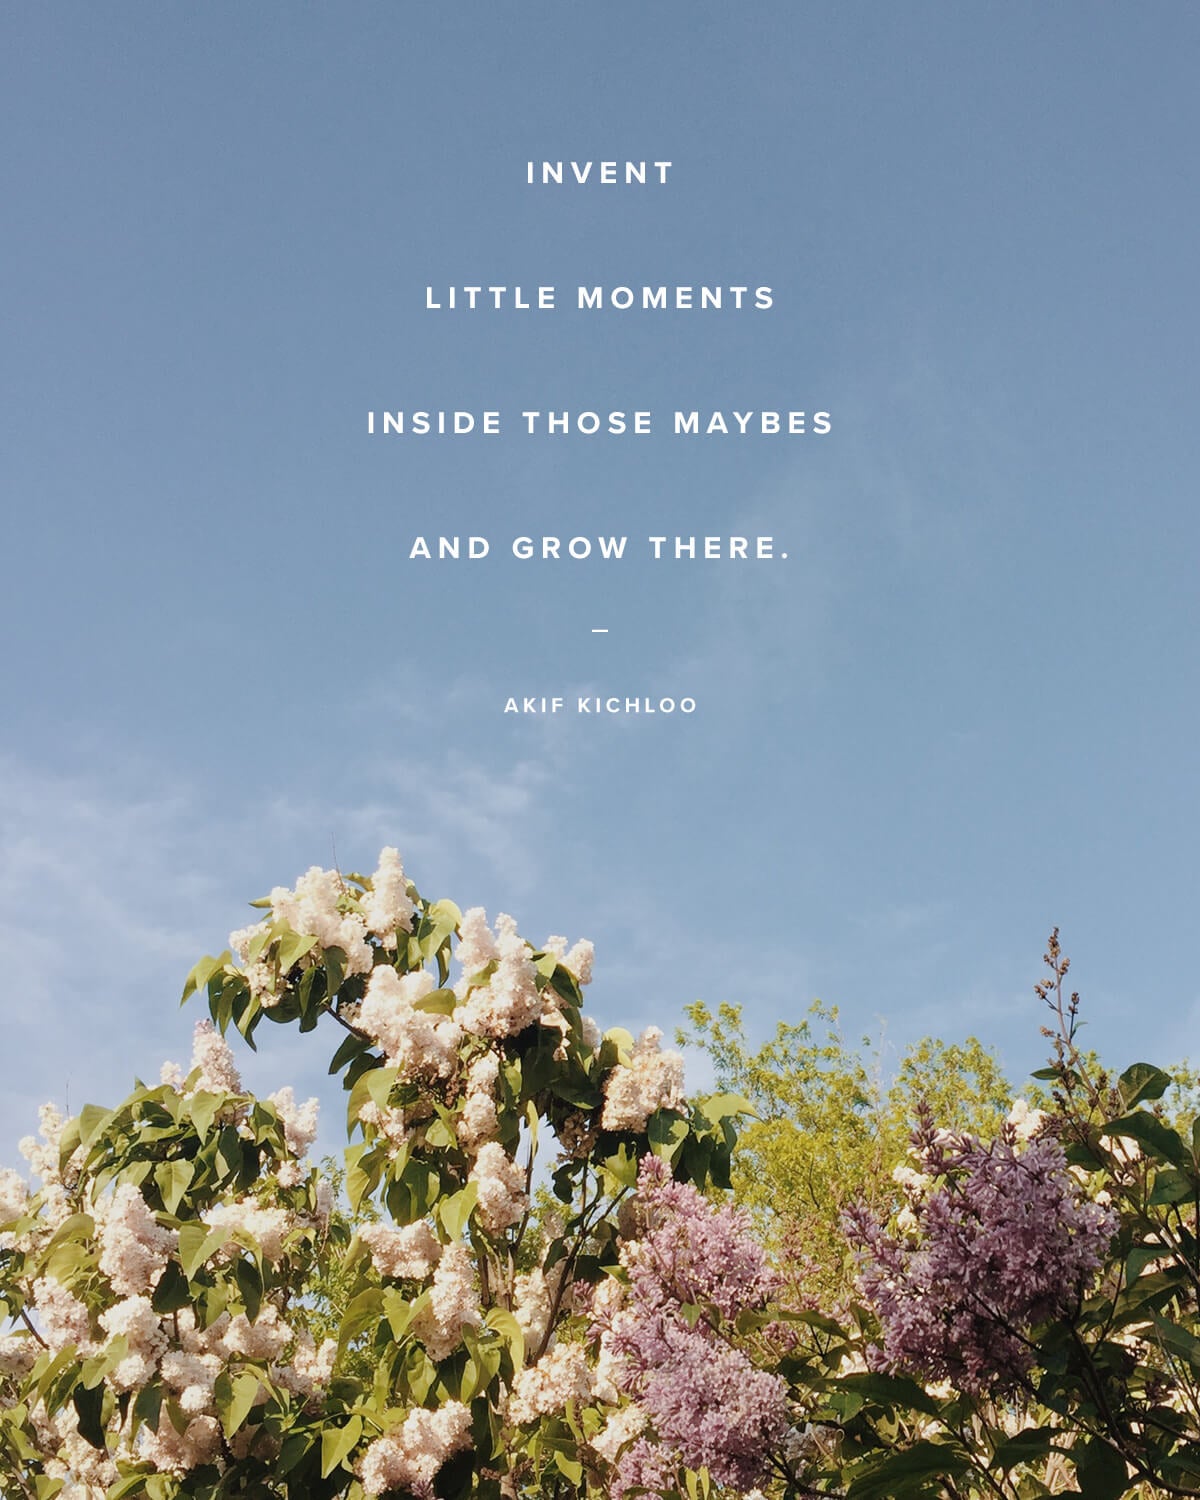 Invent little moments inside those maybes and grow there